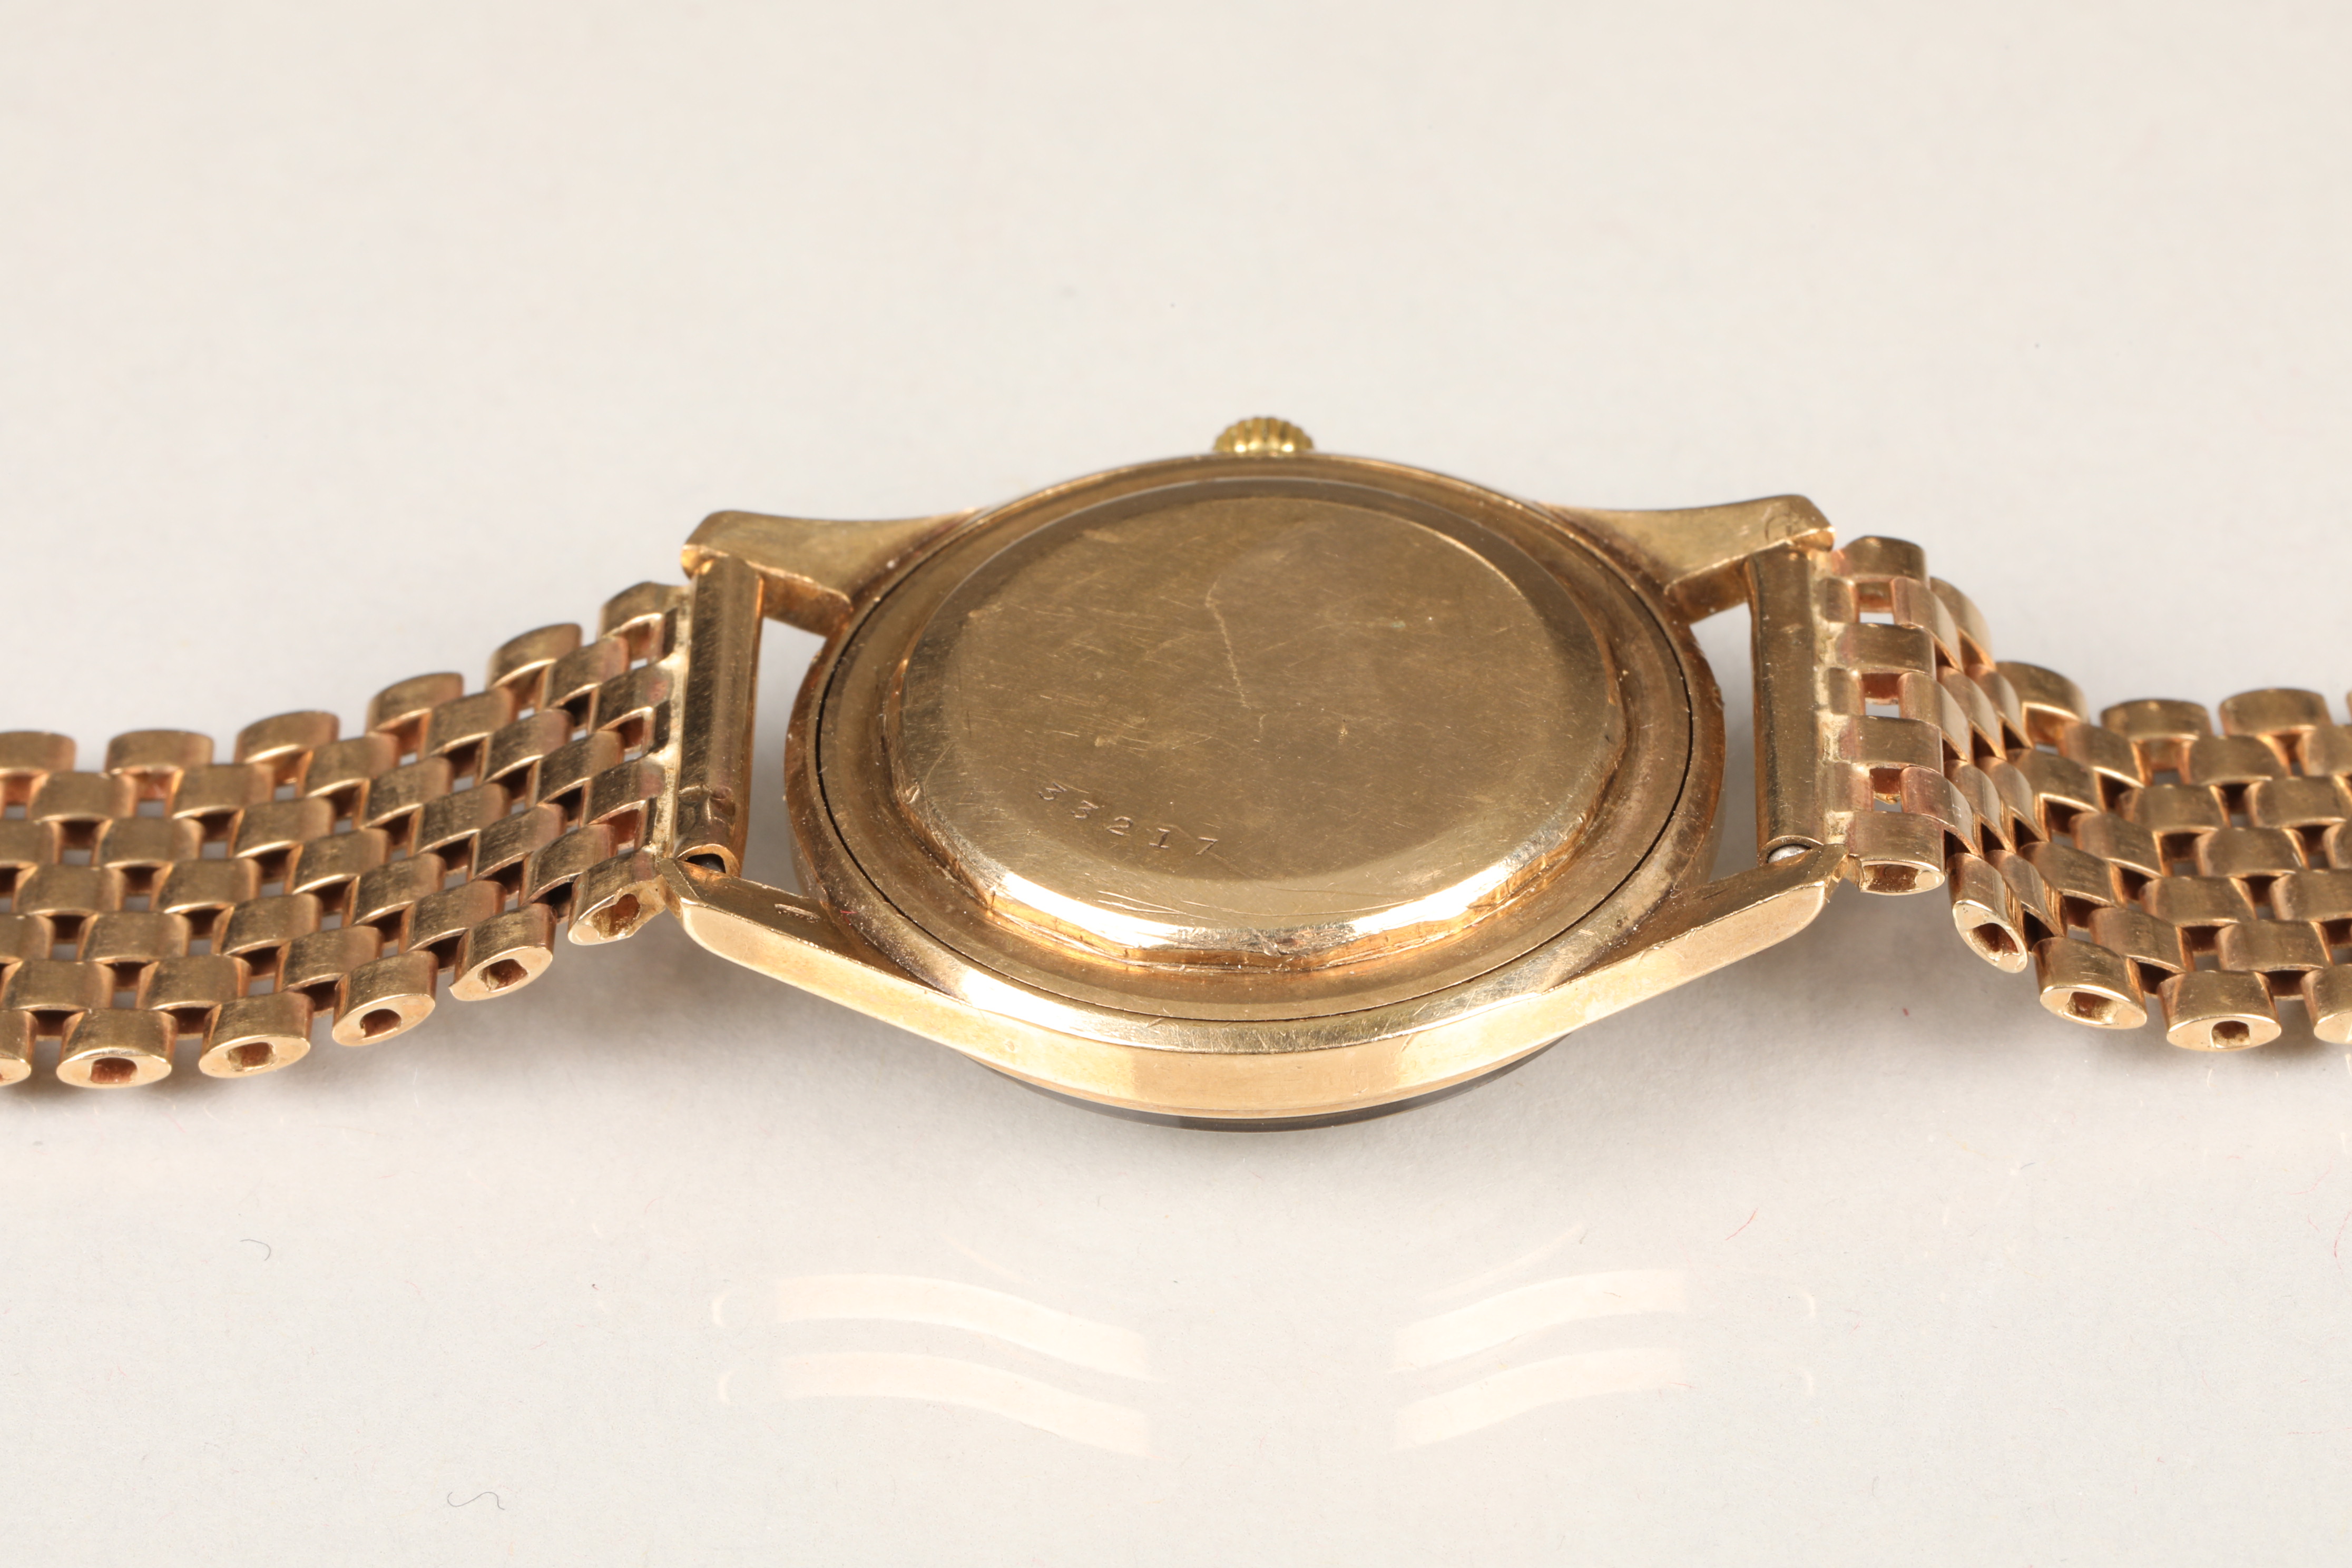 Gents 9 carat gold Jaeger-LeCoultre wristwatch, champagne dial with gilt baton hour markers, - Image 3 of 12